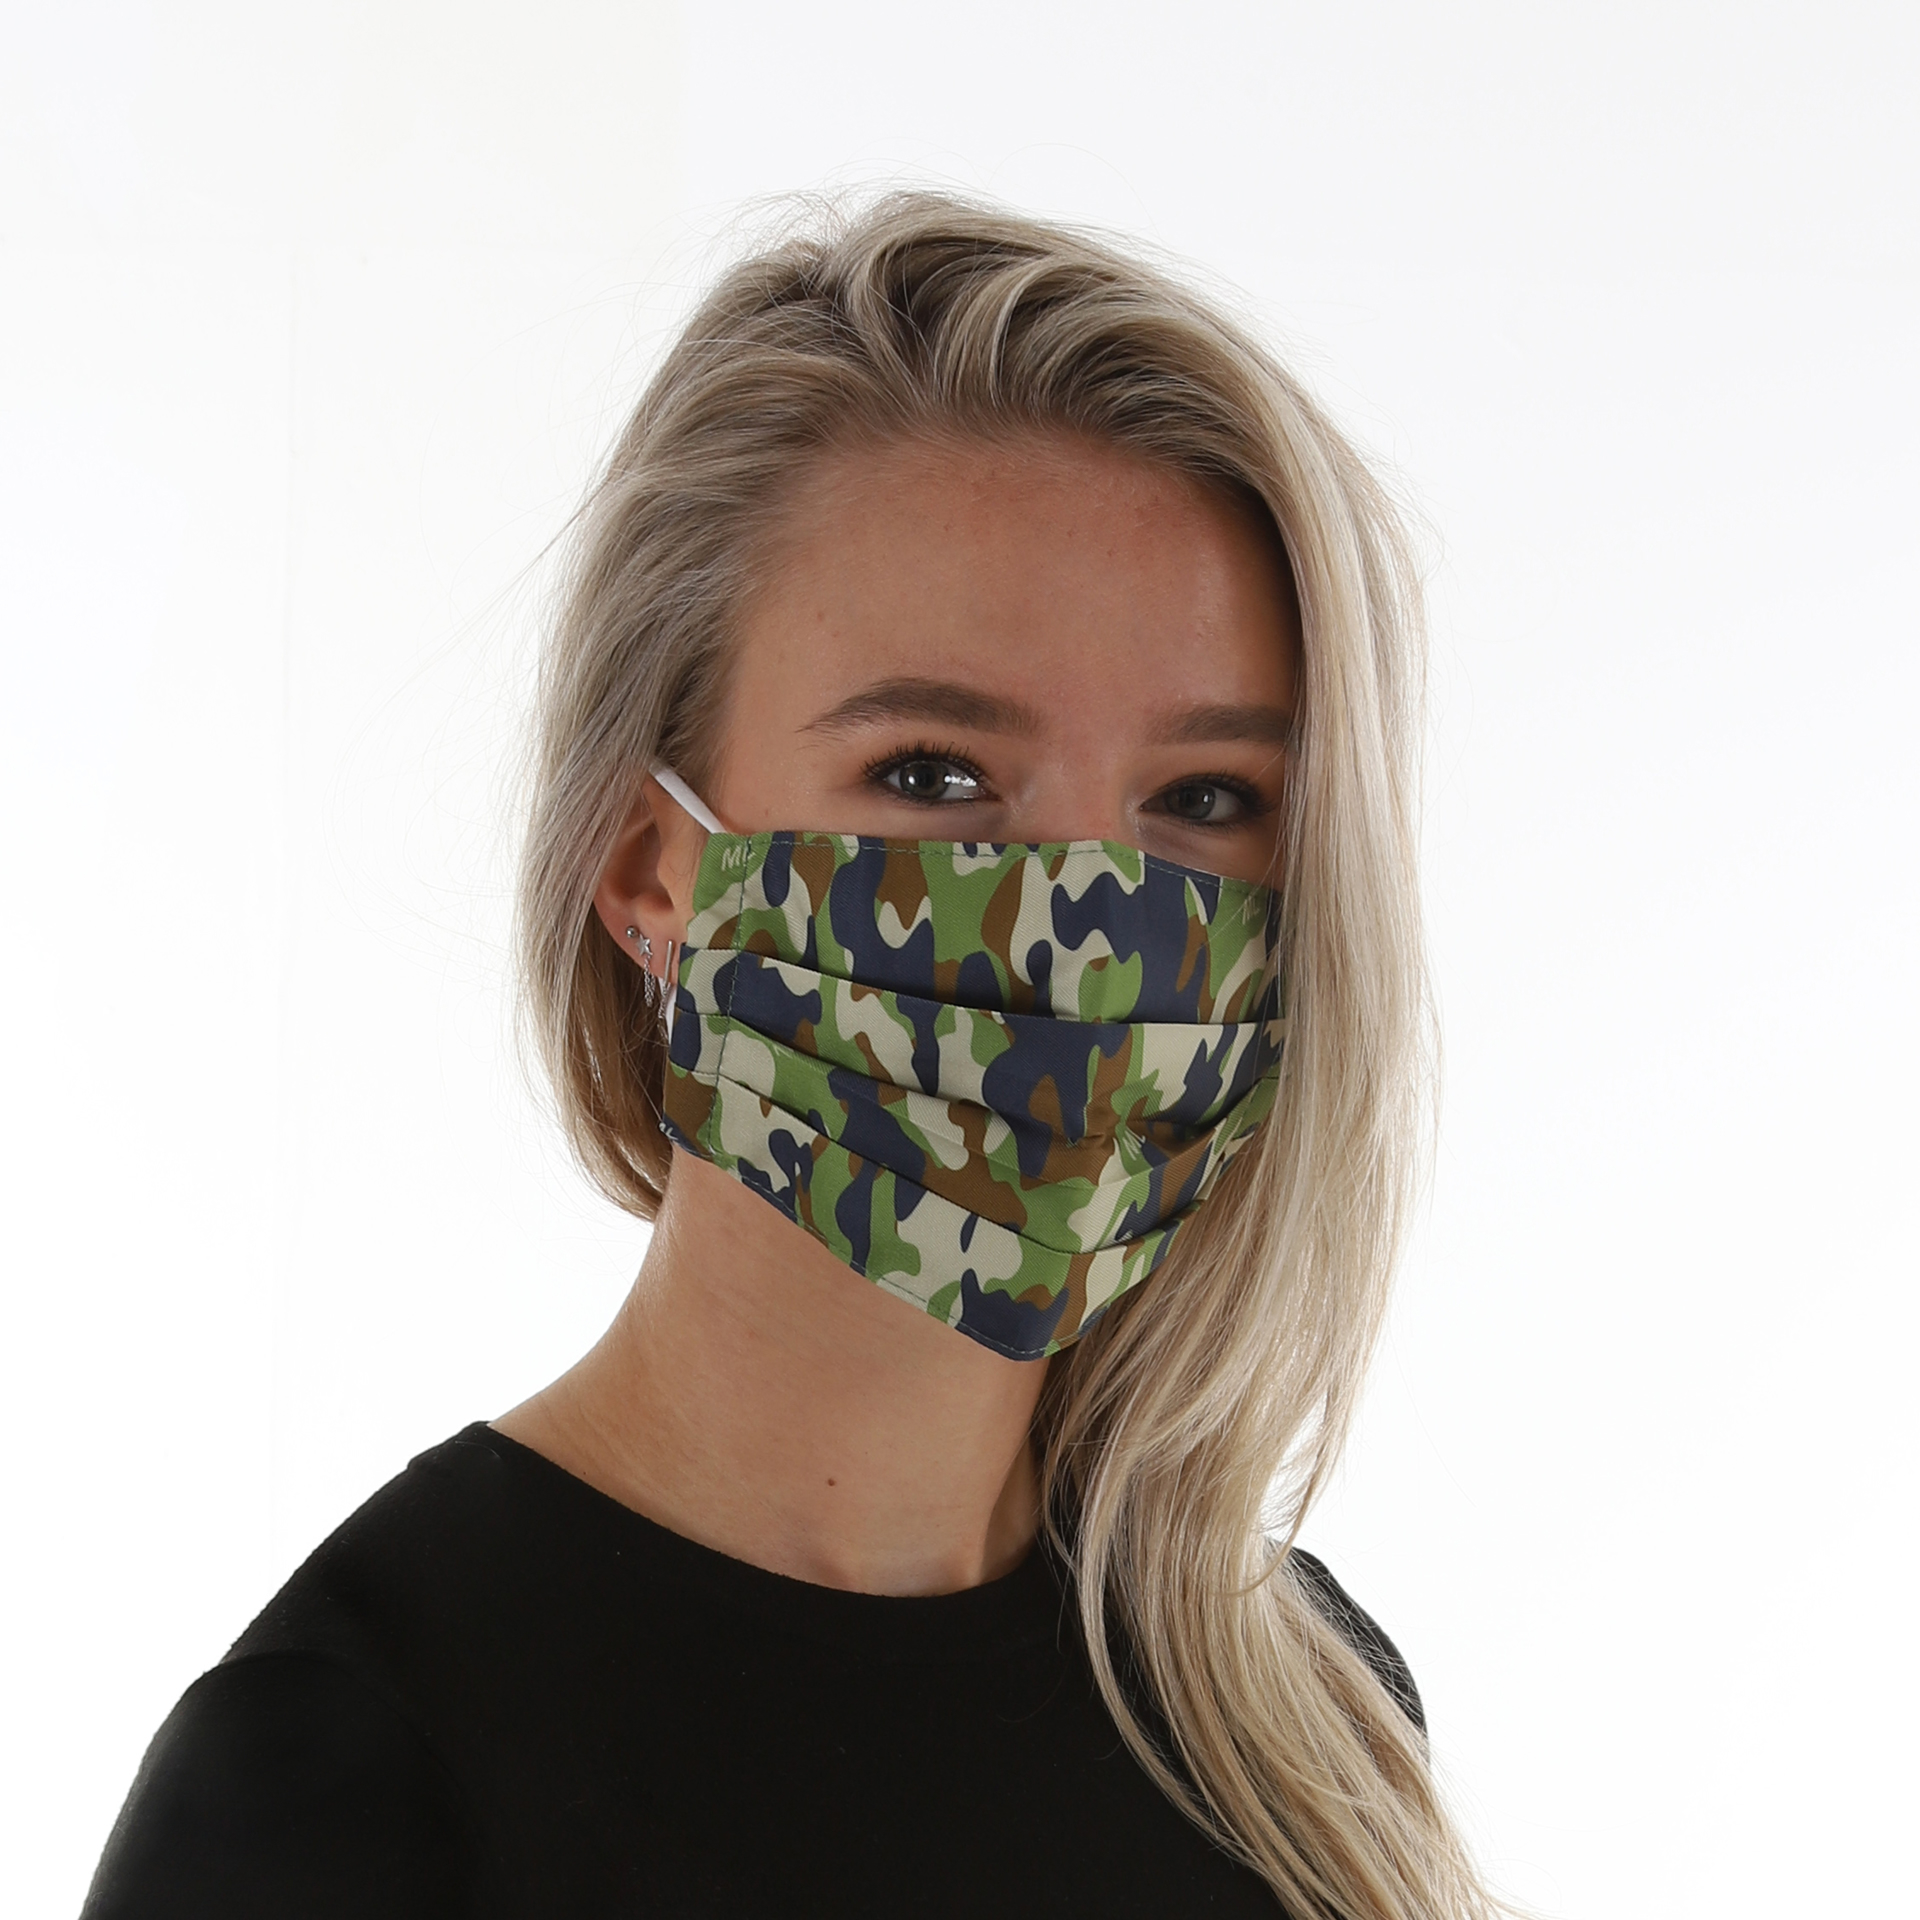 Pleated Face Mask in camo print being worn